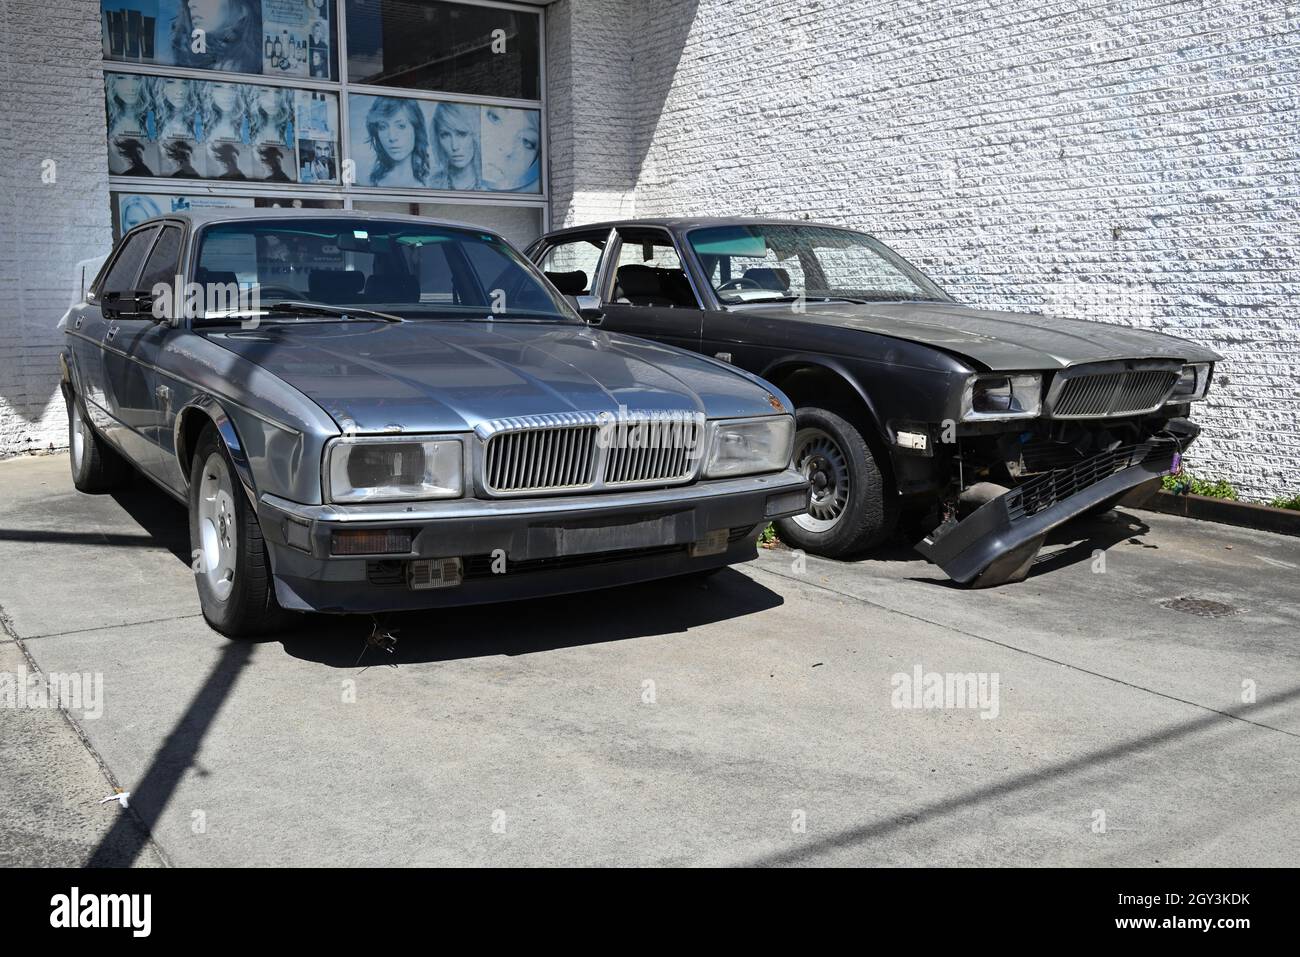 Two wrecked cars sitting outside a shop. Both are Jaguar XJ (XJ40) models, though one appears to be a Daimler-badged Double Six variant. Stock Photo